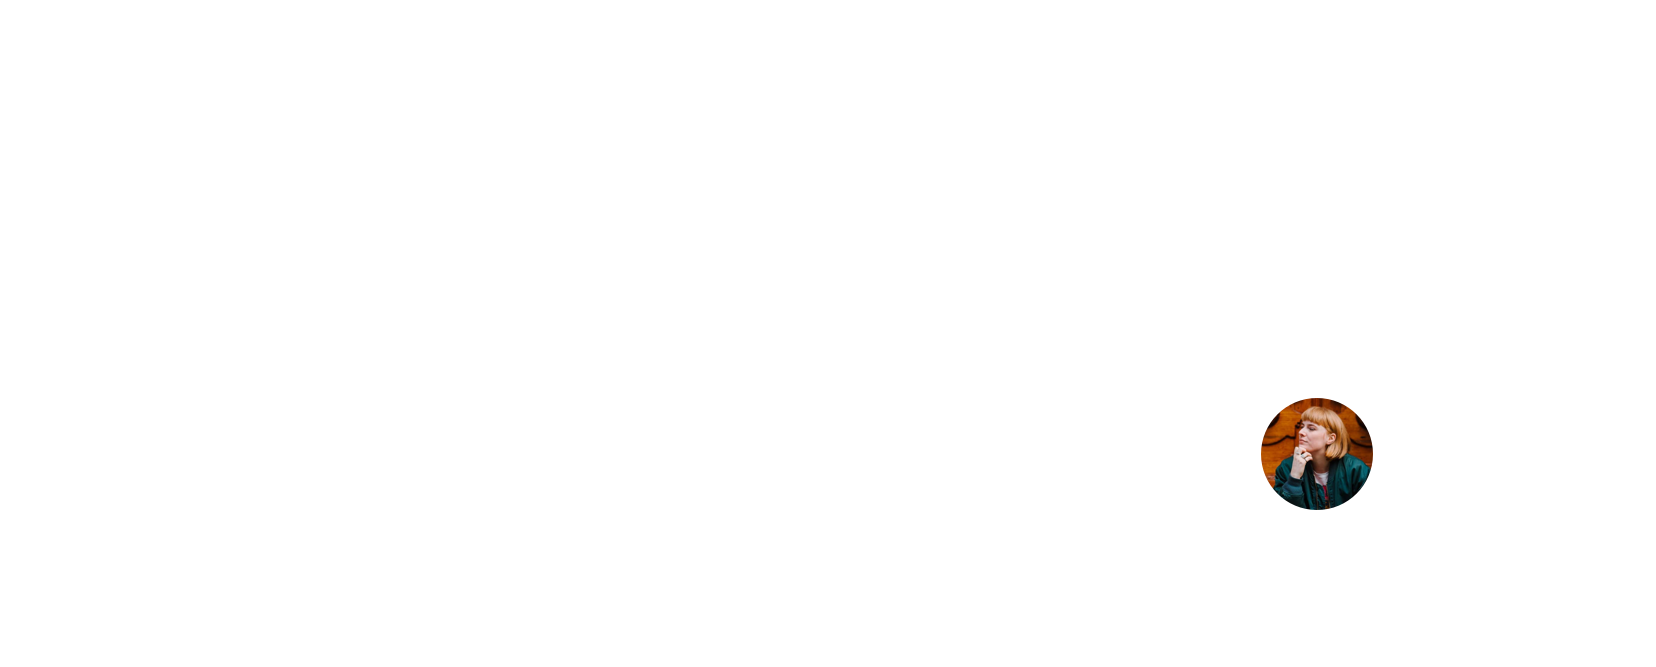 Testimonial The Self-Made Summit 2019 Business Carriere Event Ambitieuze Zakenvrouwen Freelancers Bowie Barbiers.png